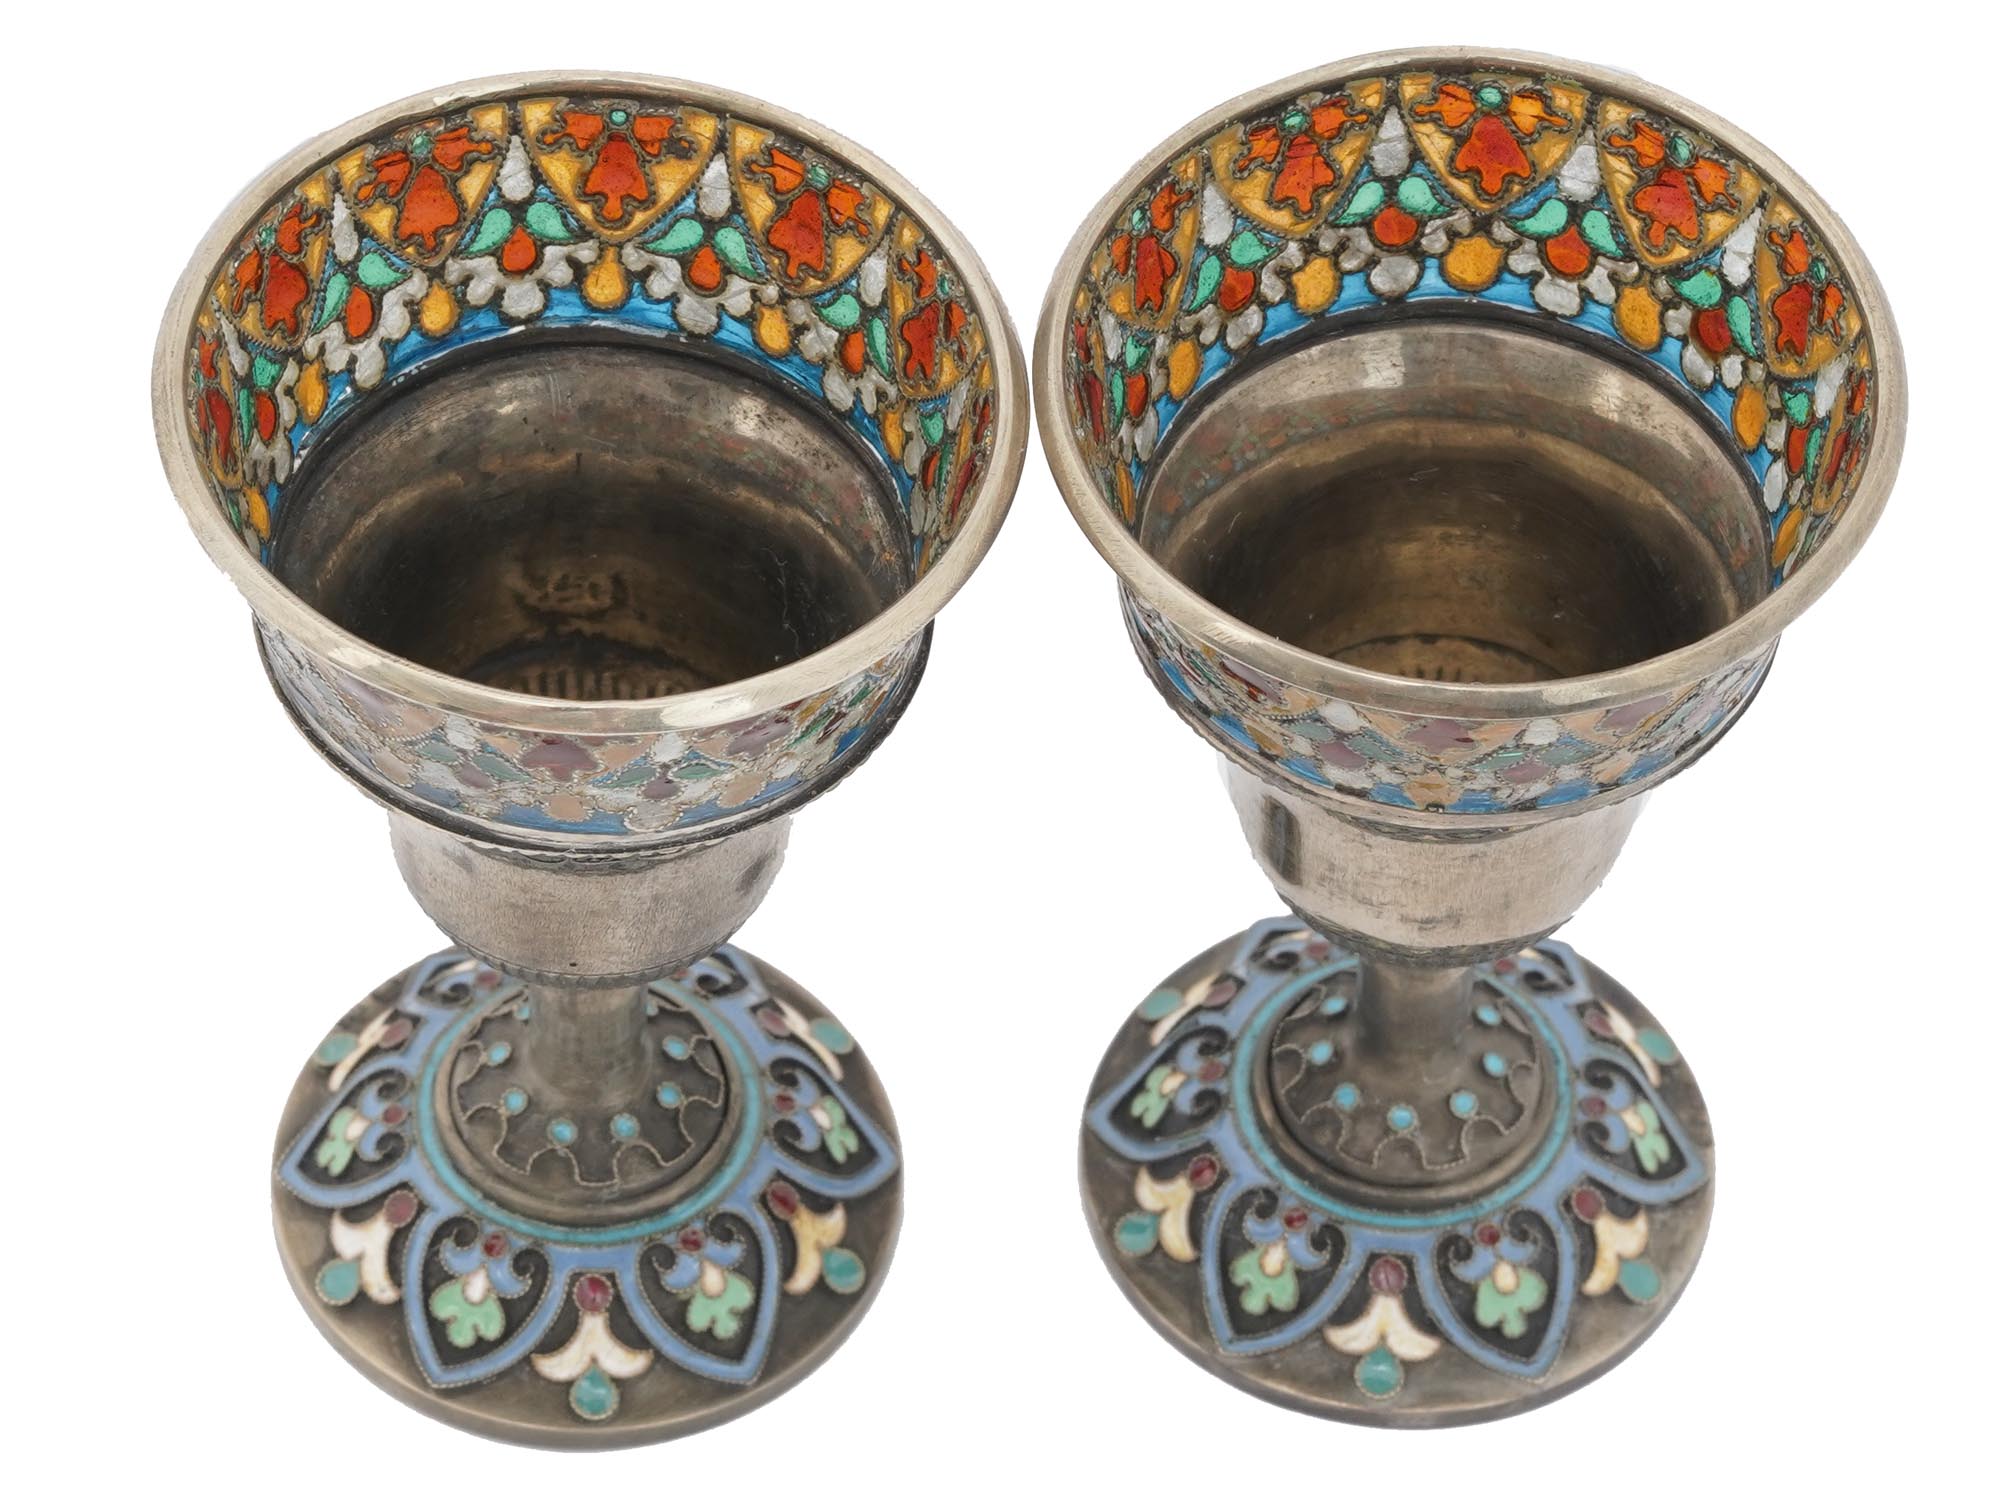 PAIR OF RUSSIAN SILVER ENAMEL SHOT CUP GOBLETS PIC-1